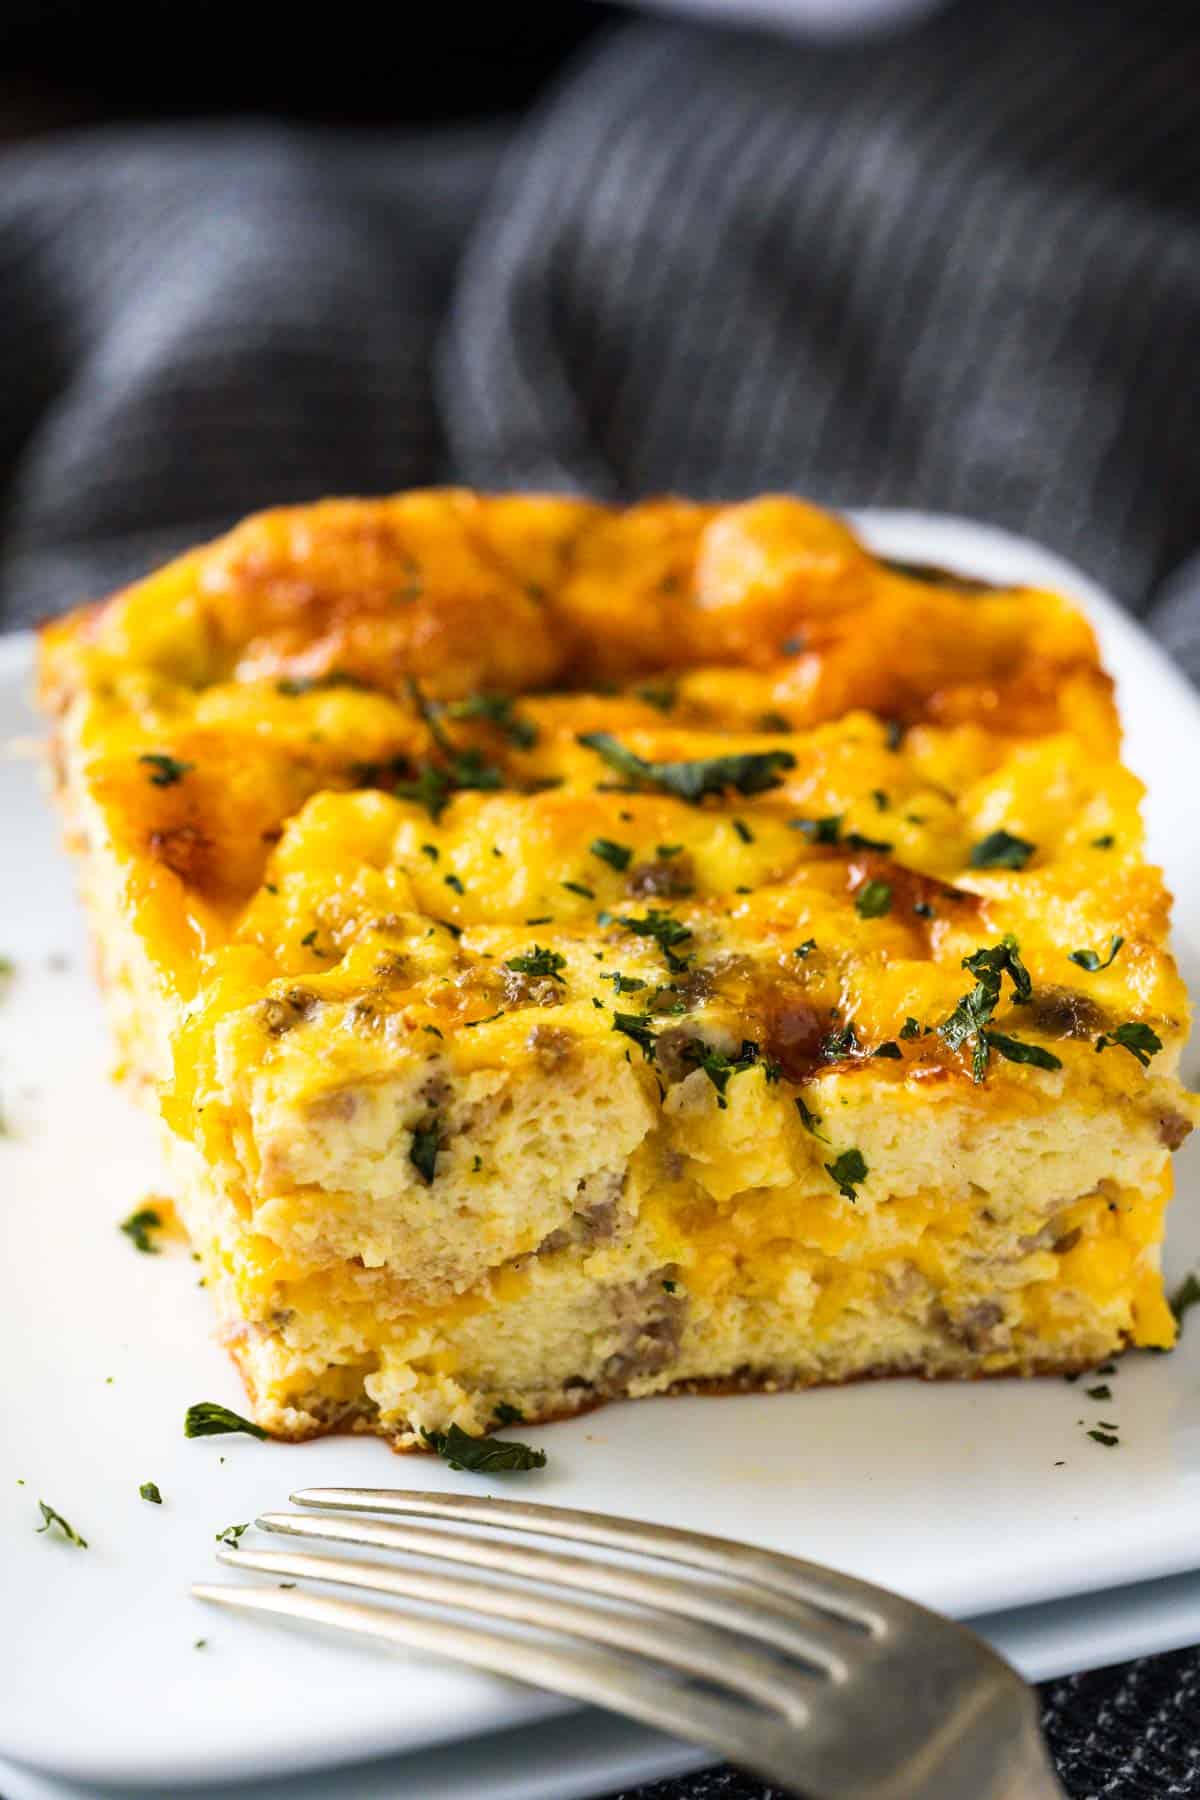 Upclose image of overnight breakfast casserole featuring the fluffy texture of the souffle.